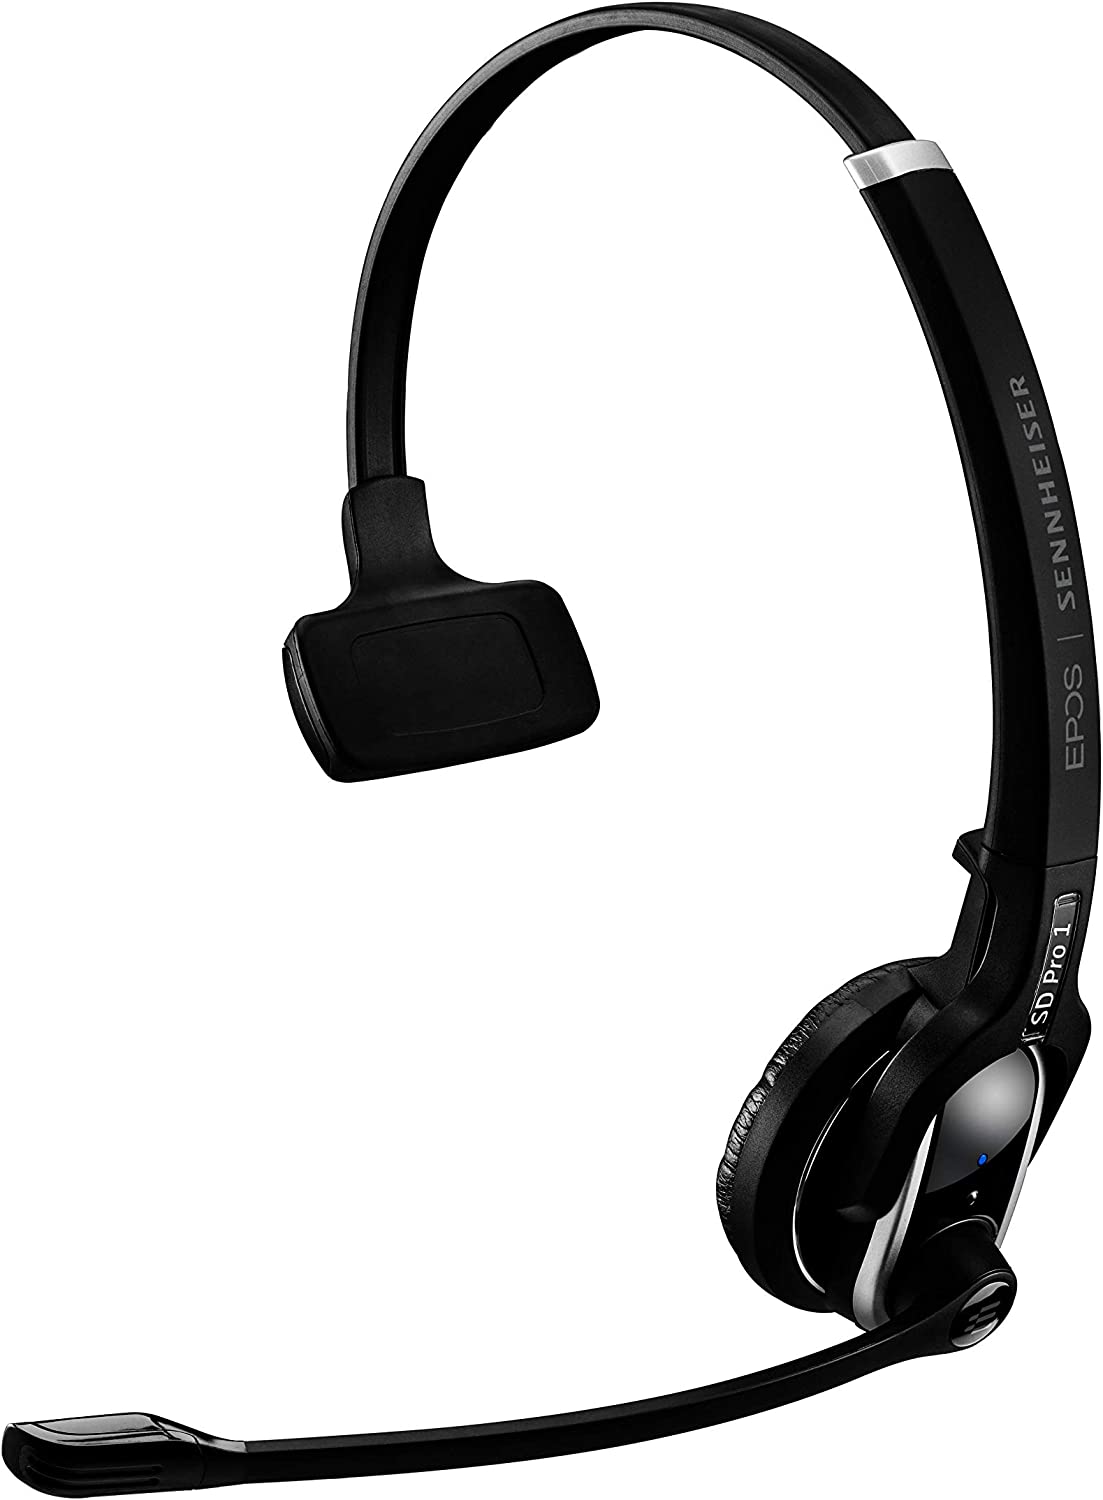 Sennheiser SD Pro 1 ML (506010) - Single-Sided, Multi Connectivity Wireless DECT Headset for Desk Phone &amp; Certified for Skype for Business, Ultra Noise-Cancelling Microphone (Black) SD Pro 1 ML Headset